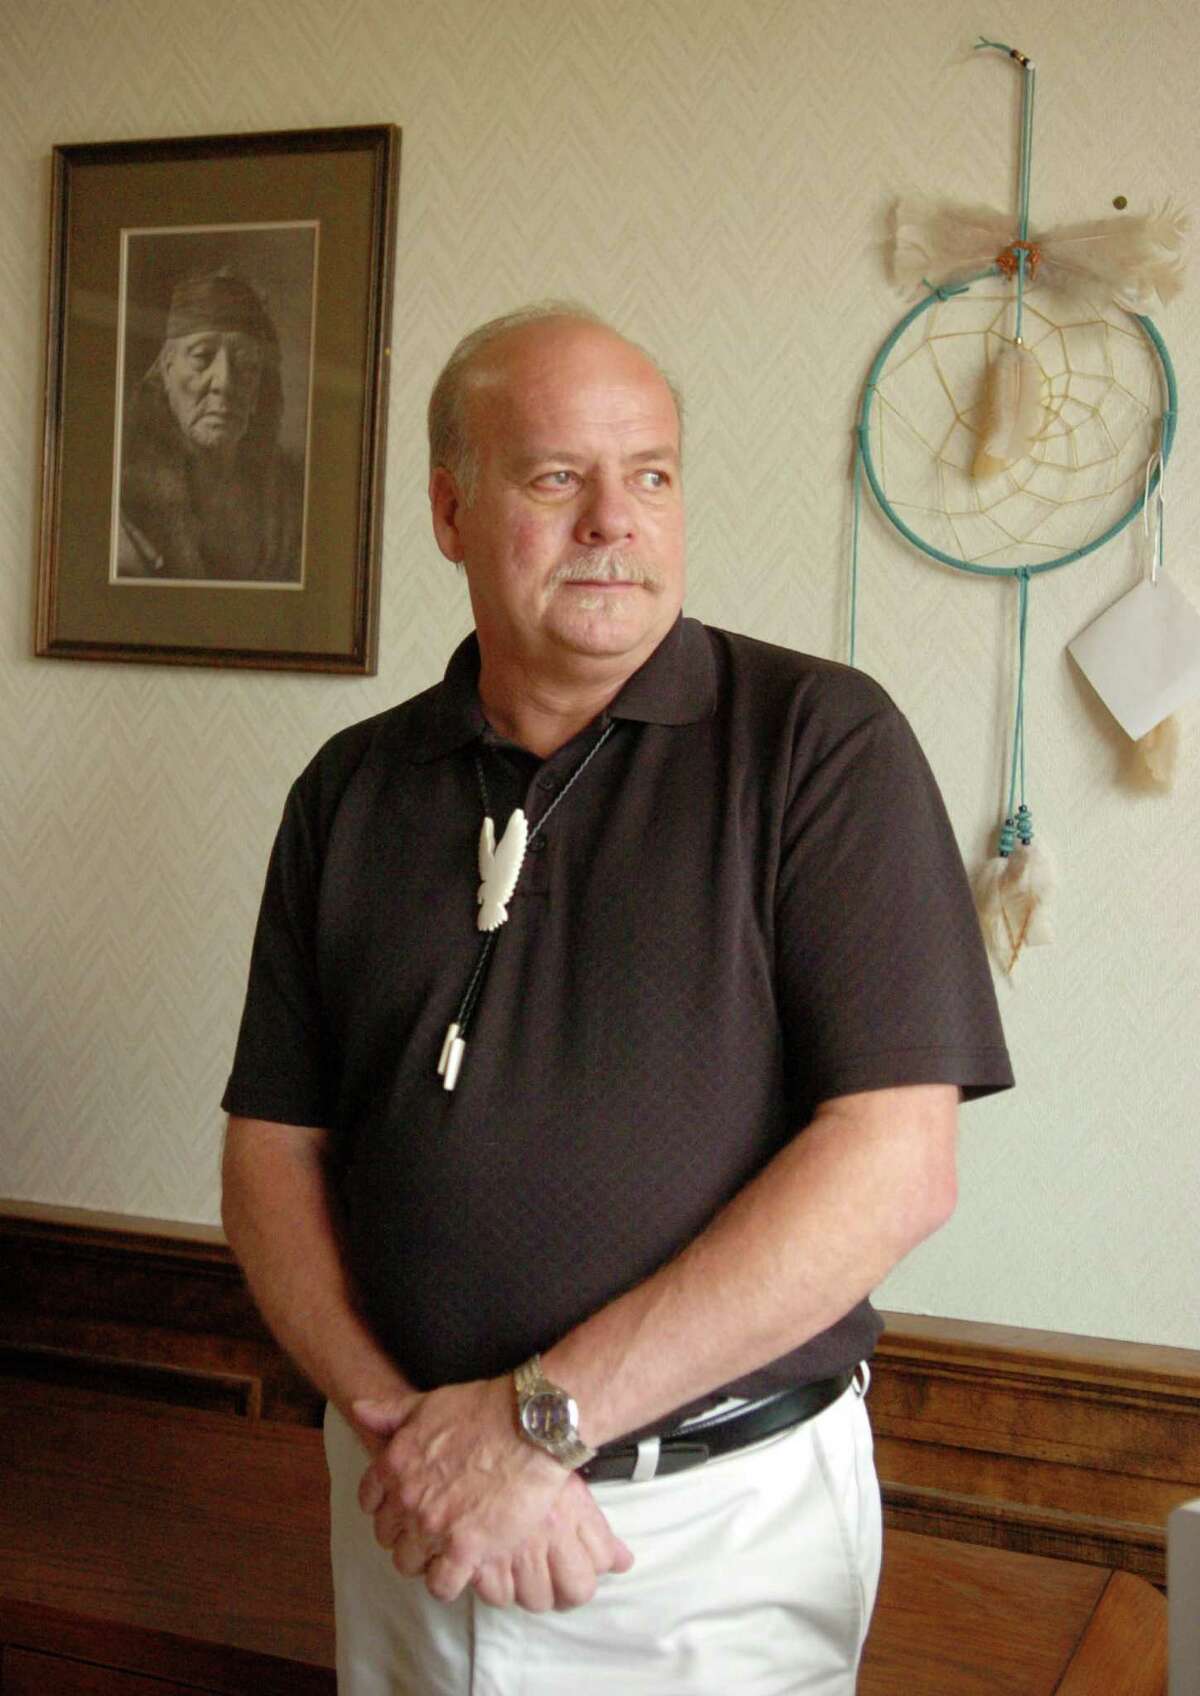 Chief Richard Velky, of the Schaghticoke (CQ) Tribal Nation, at his office in Derby, Conn. on July 22, 2005.